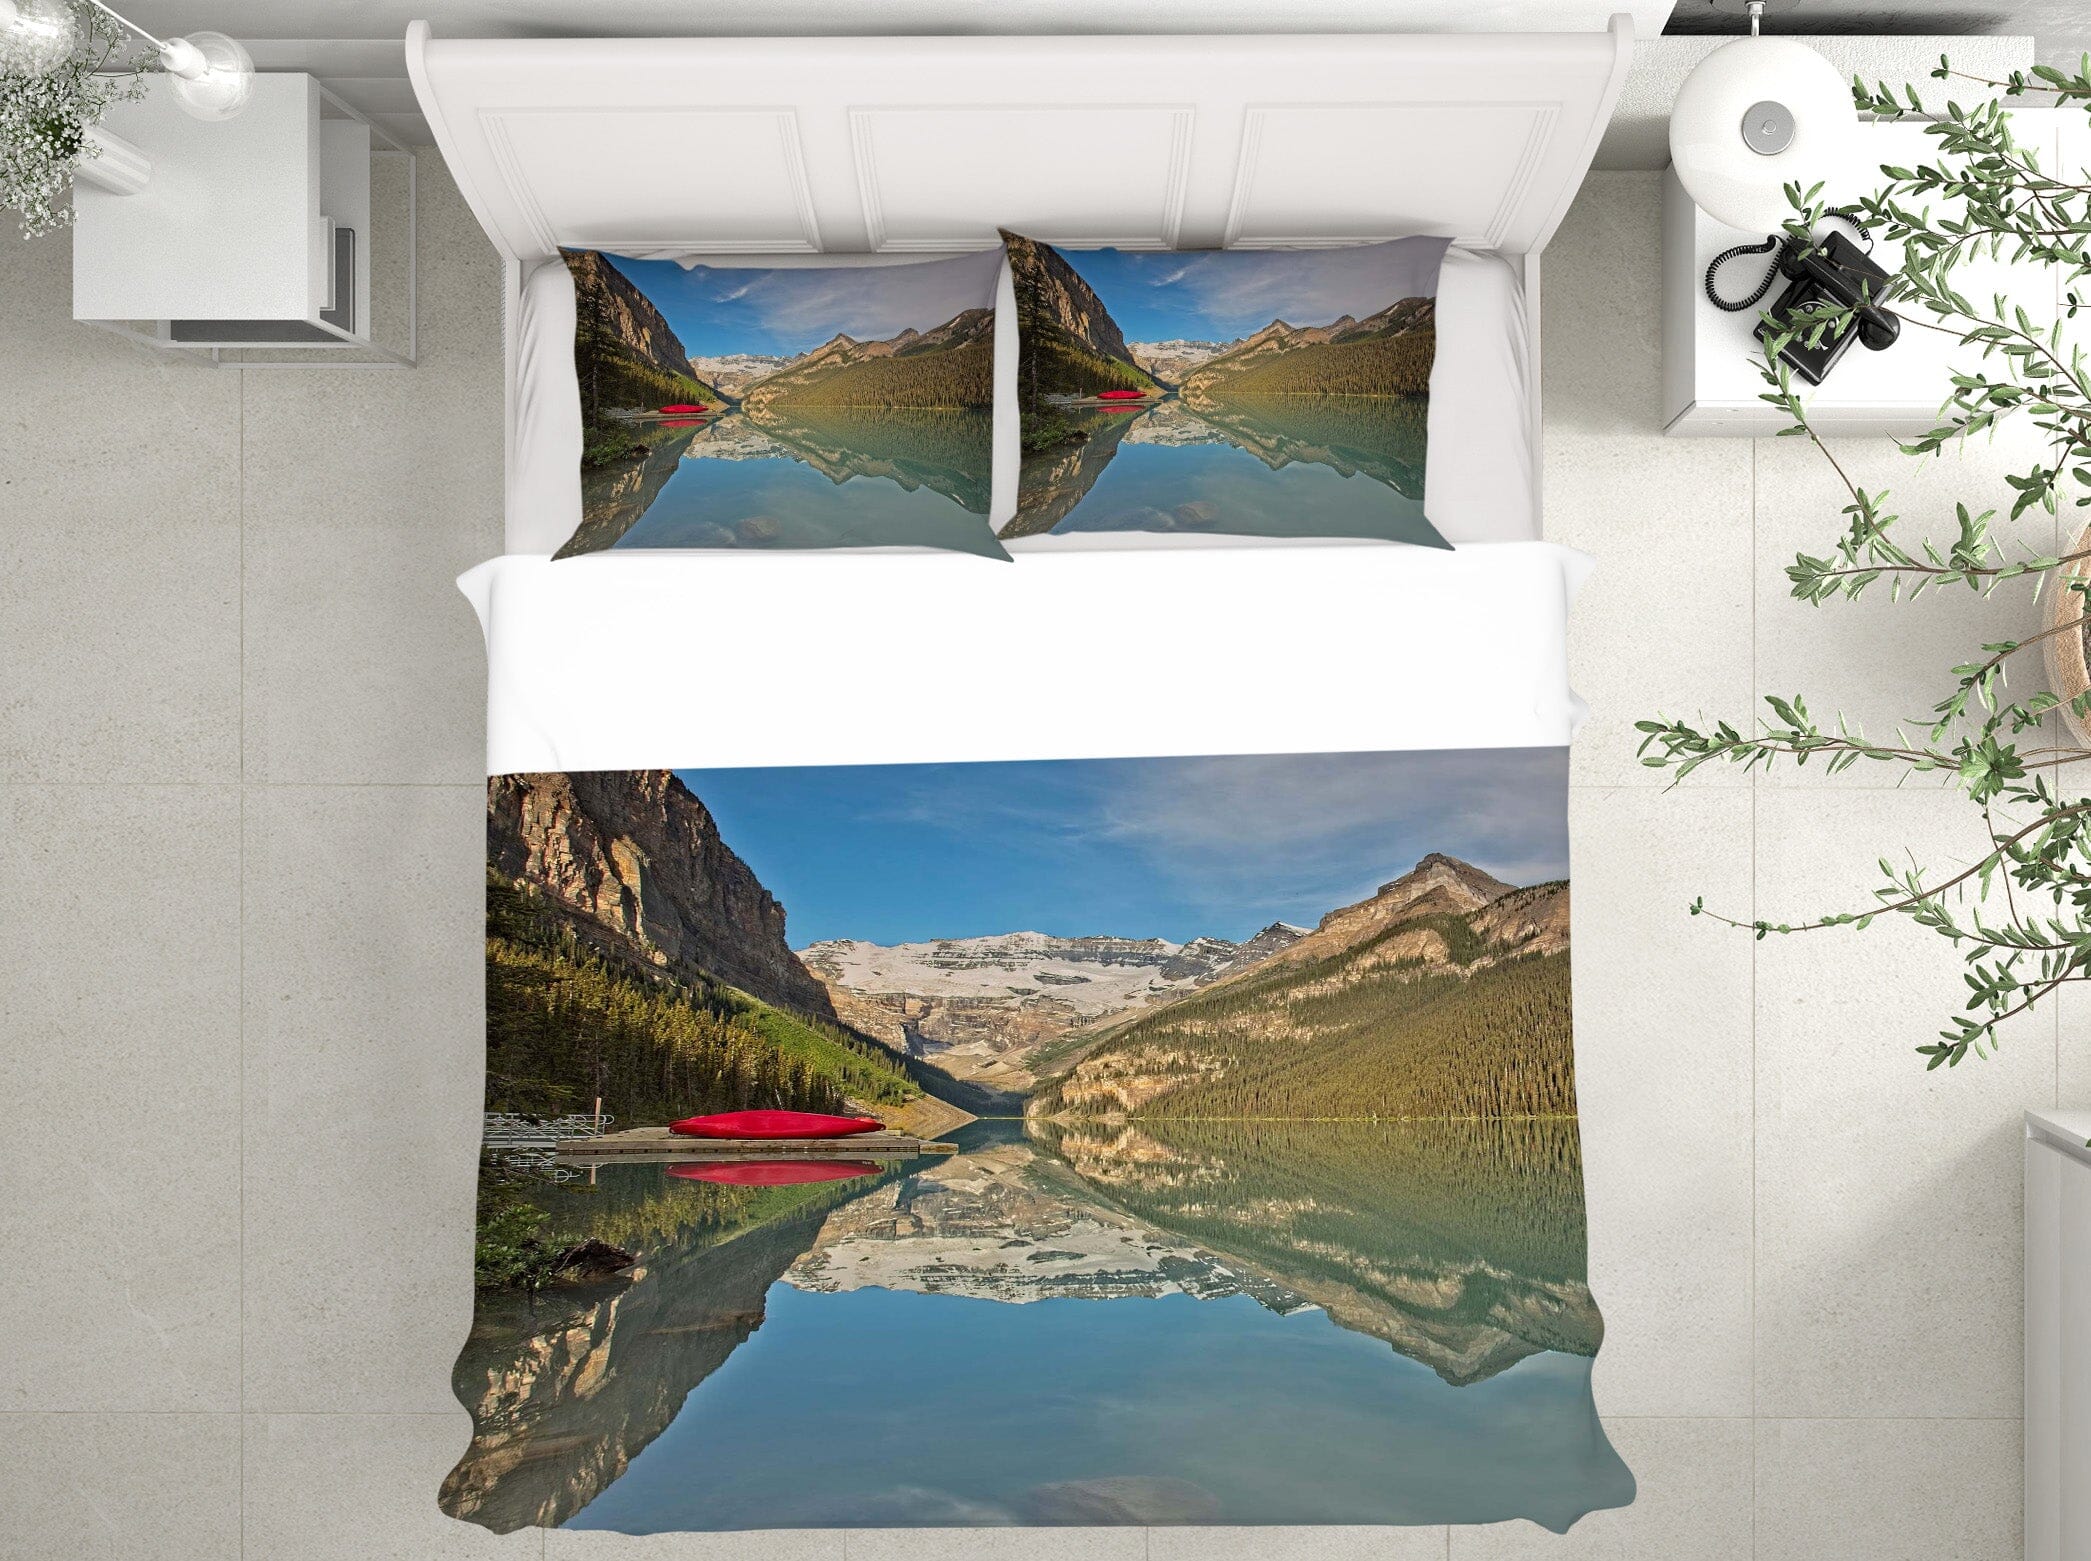 3D Lake Louise Sunrise 2116 Kathy Barefield Bedding Bed Pillowcases Quilt Quiet Covers AJ Creativity Home 